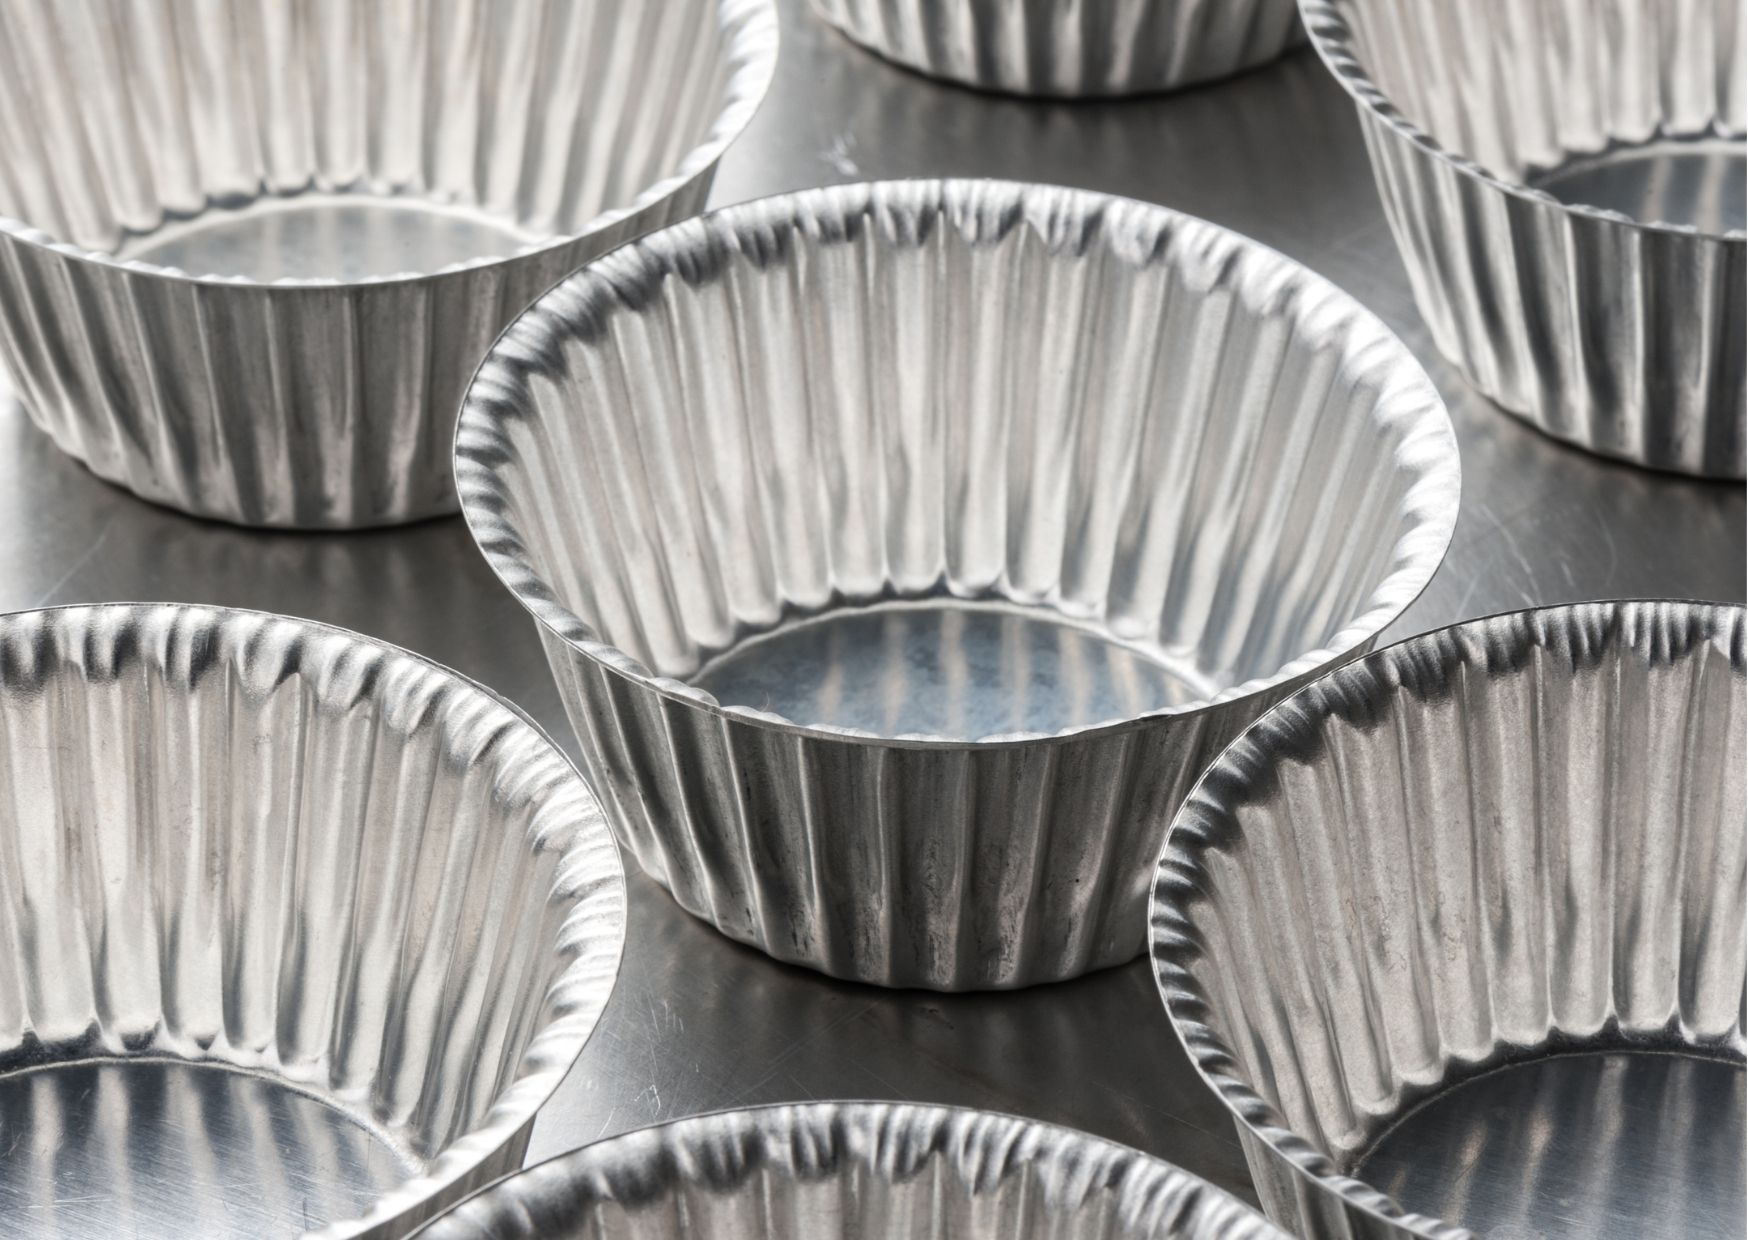 Expansion of local production of components for social catering and ready-made meals in aluminum foil trays